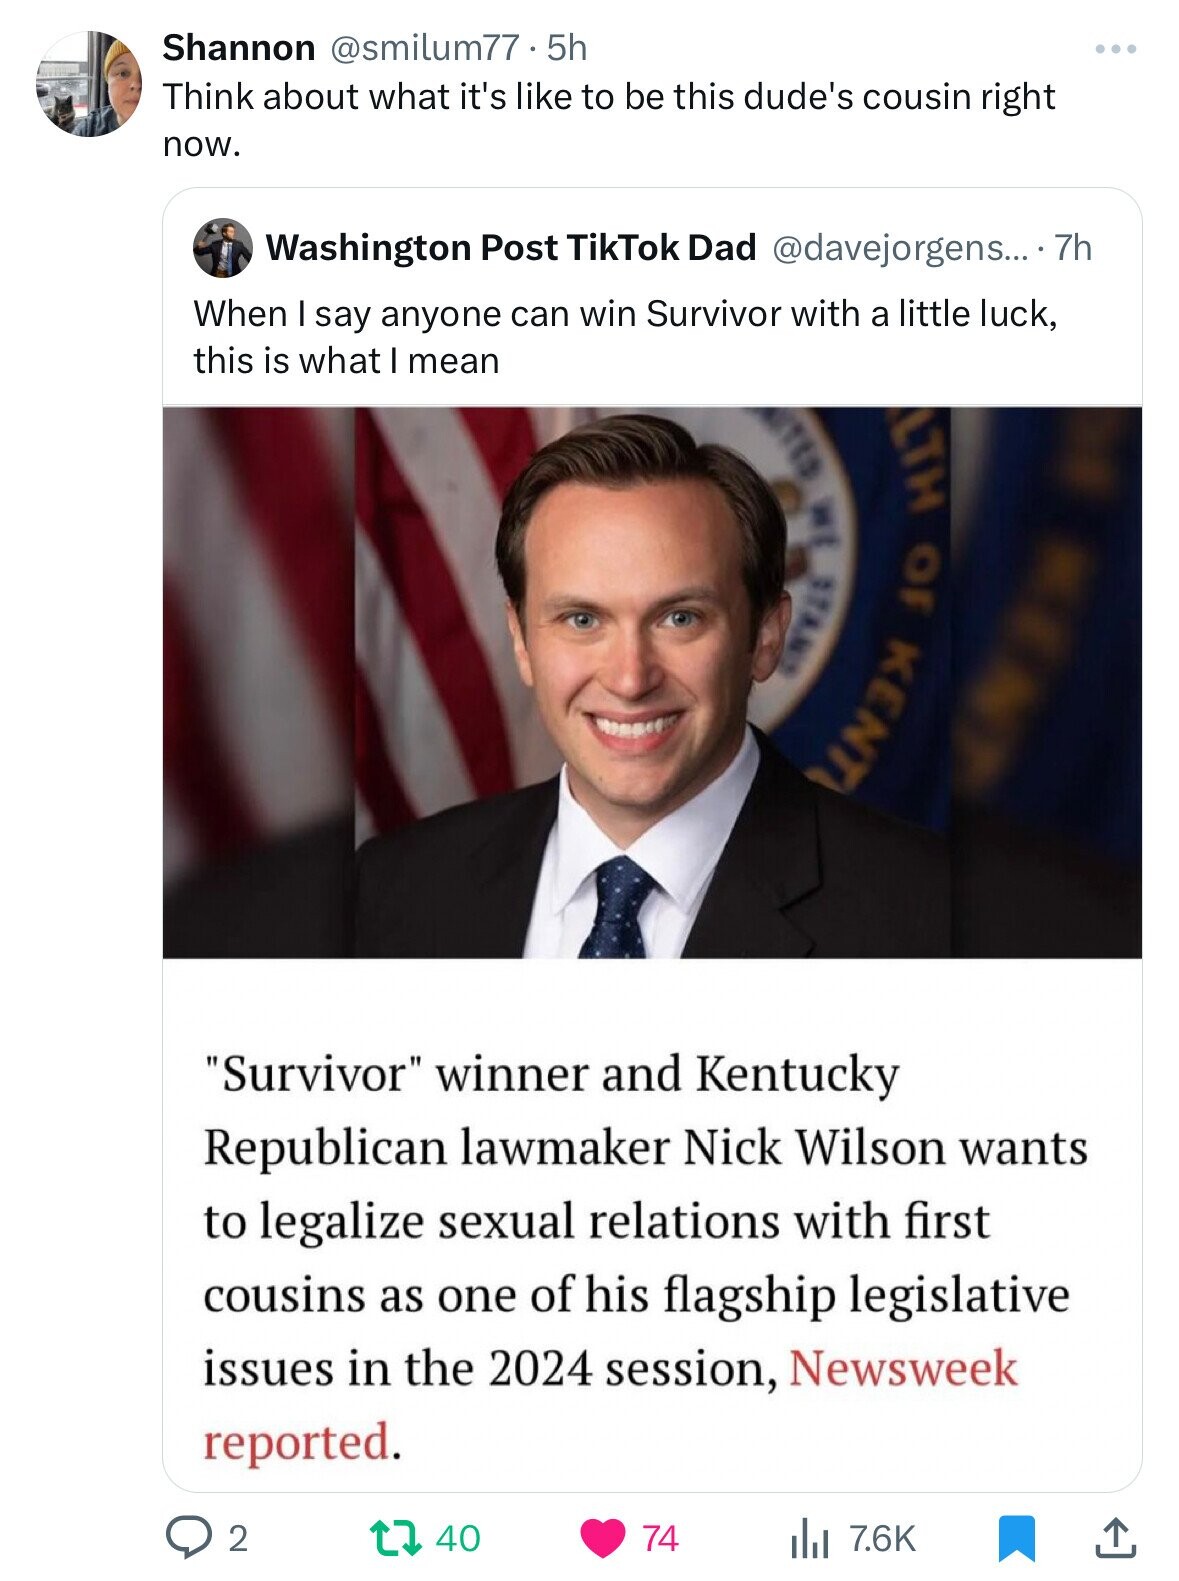 photo caption - Shannon 5h Think about what it's to be this dude's cousin right now. Washington Post TikTok Dad .... 7h When I say anyone can win Survivor with a little luck, this is what I mean Q2 t 40 Th "Survivor" winner and Kentucky Republican lawmake